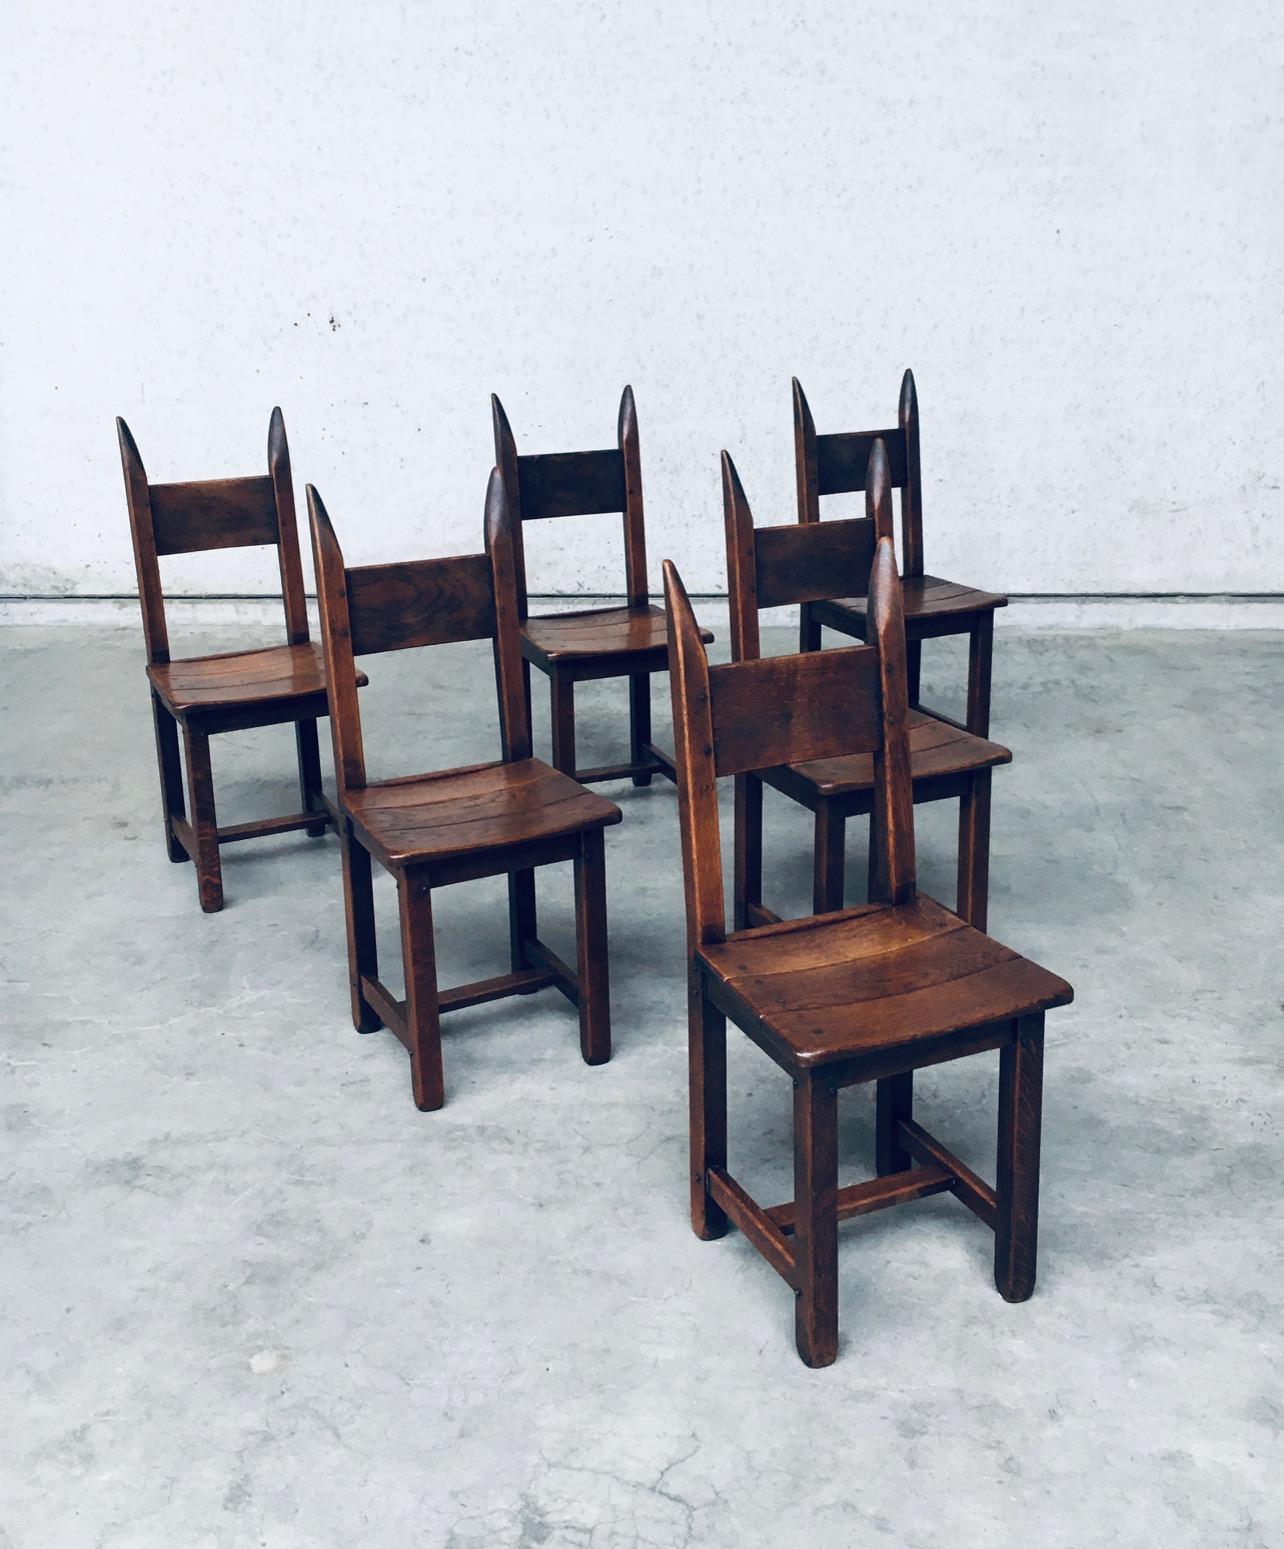 Vintage Brutalist Design Style Oak Dining Chair set of 6. Made in France, 1960's period. Solid oak constructed chairs with very nice dark patina. These are all in very good, all original condition. Each chair measures 95,5cm x 40cm x 40cm.
Sold as a